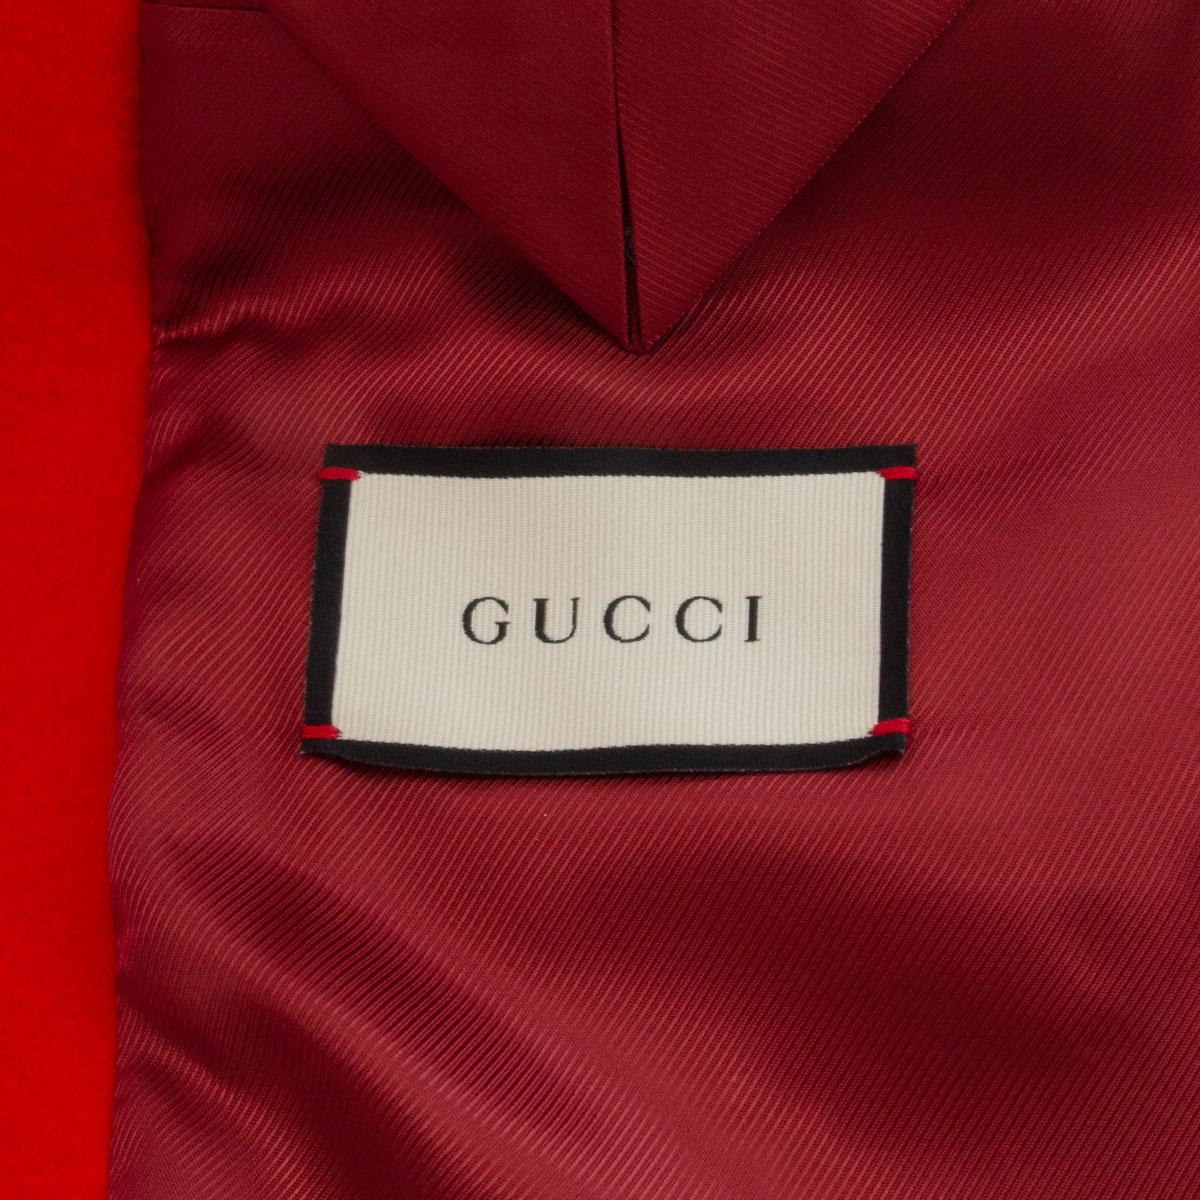 GUCCI red wool Oversized Coat Jacket 46 Mens Fits Women's XL 1